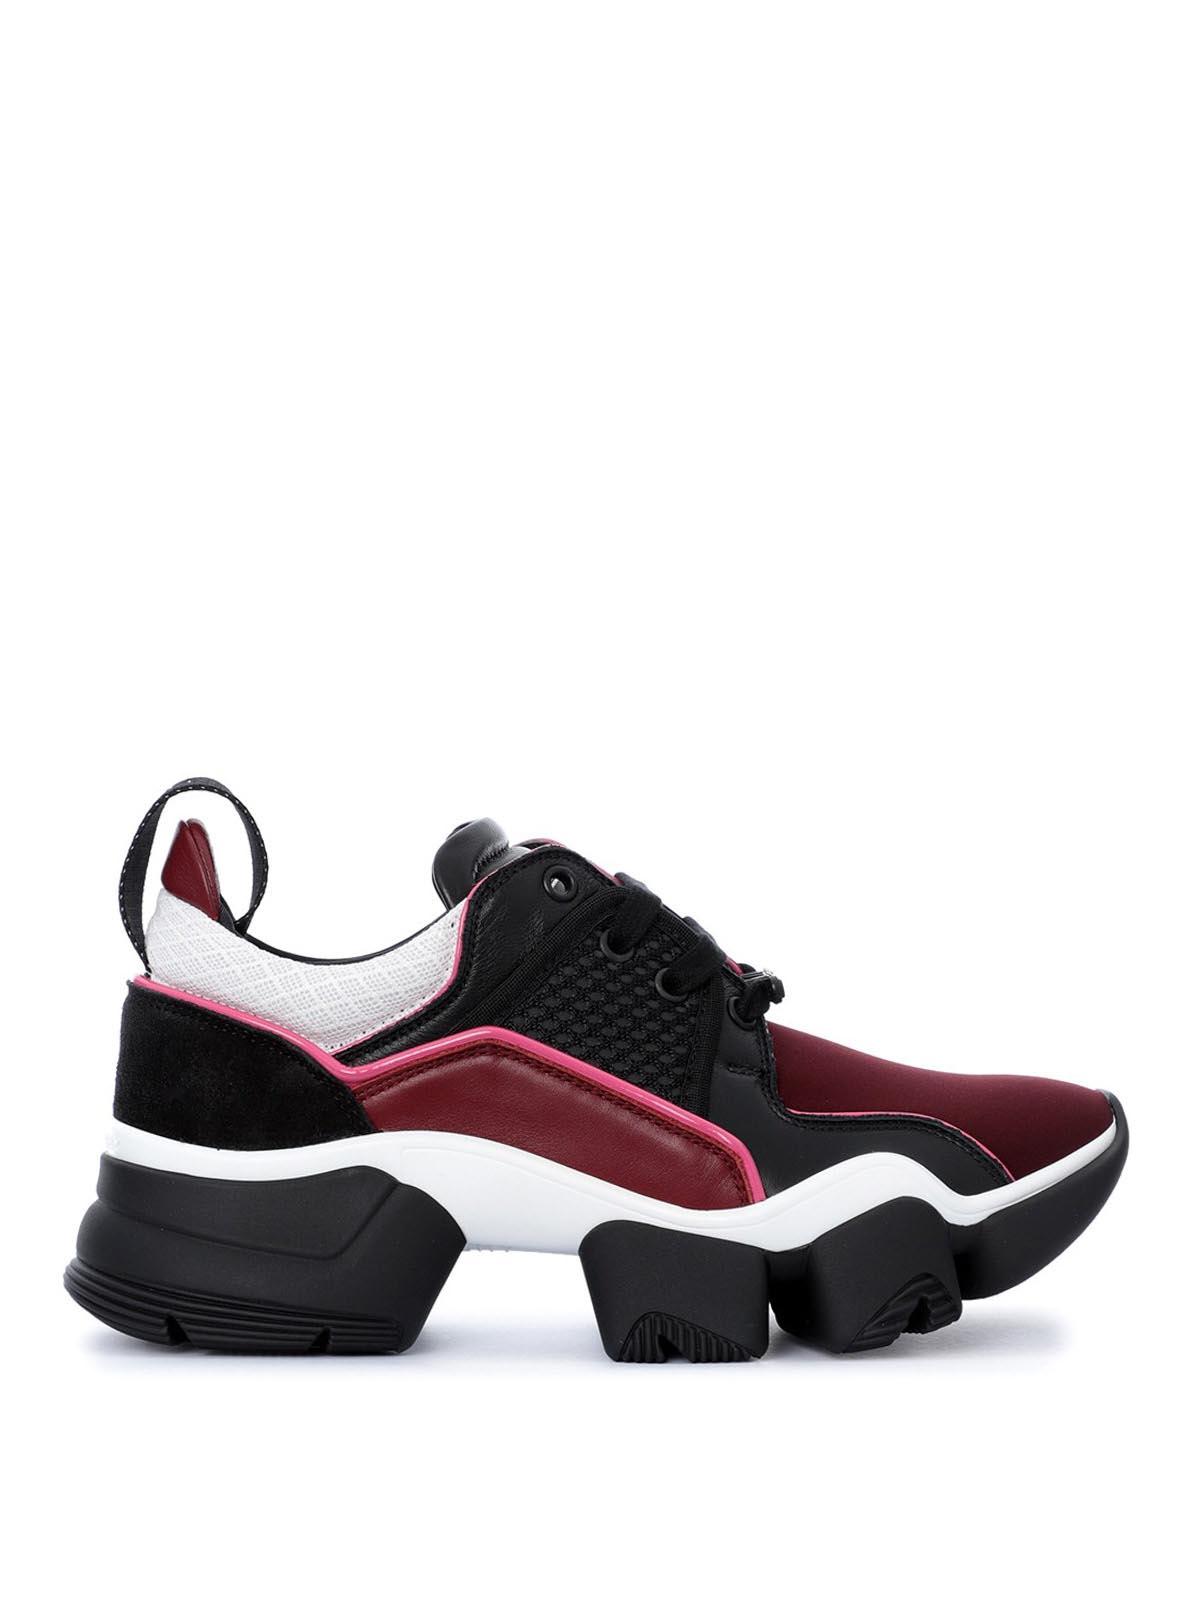 Givenchy Jaw Leather And Neoprene Sneakers for Men - Lyst